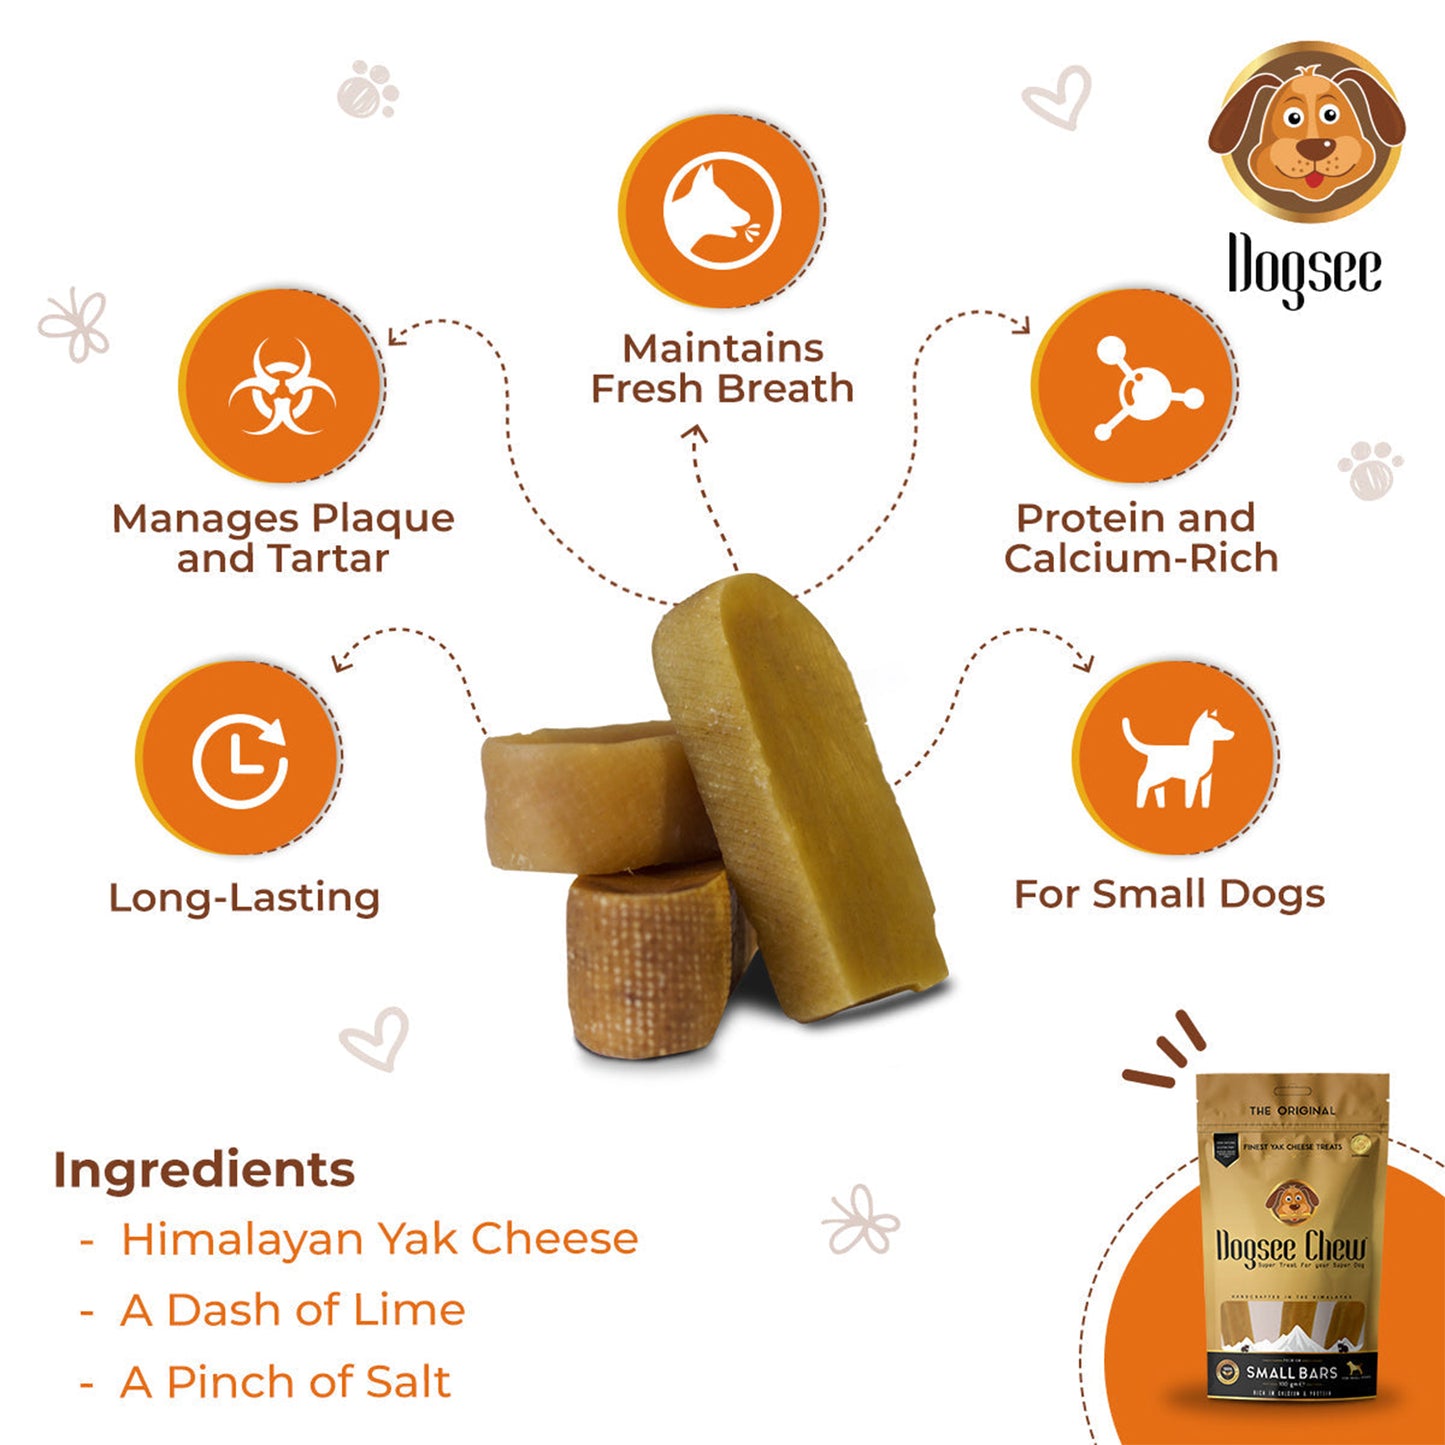 Dogsee Chew - Small Bars For Dogs